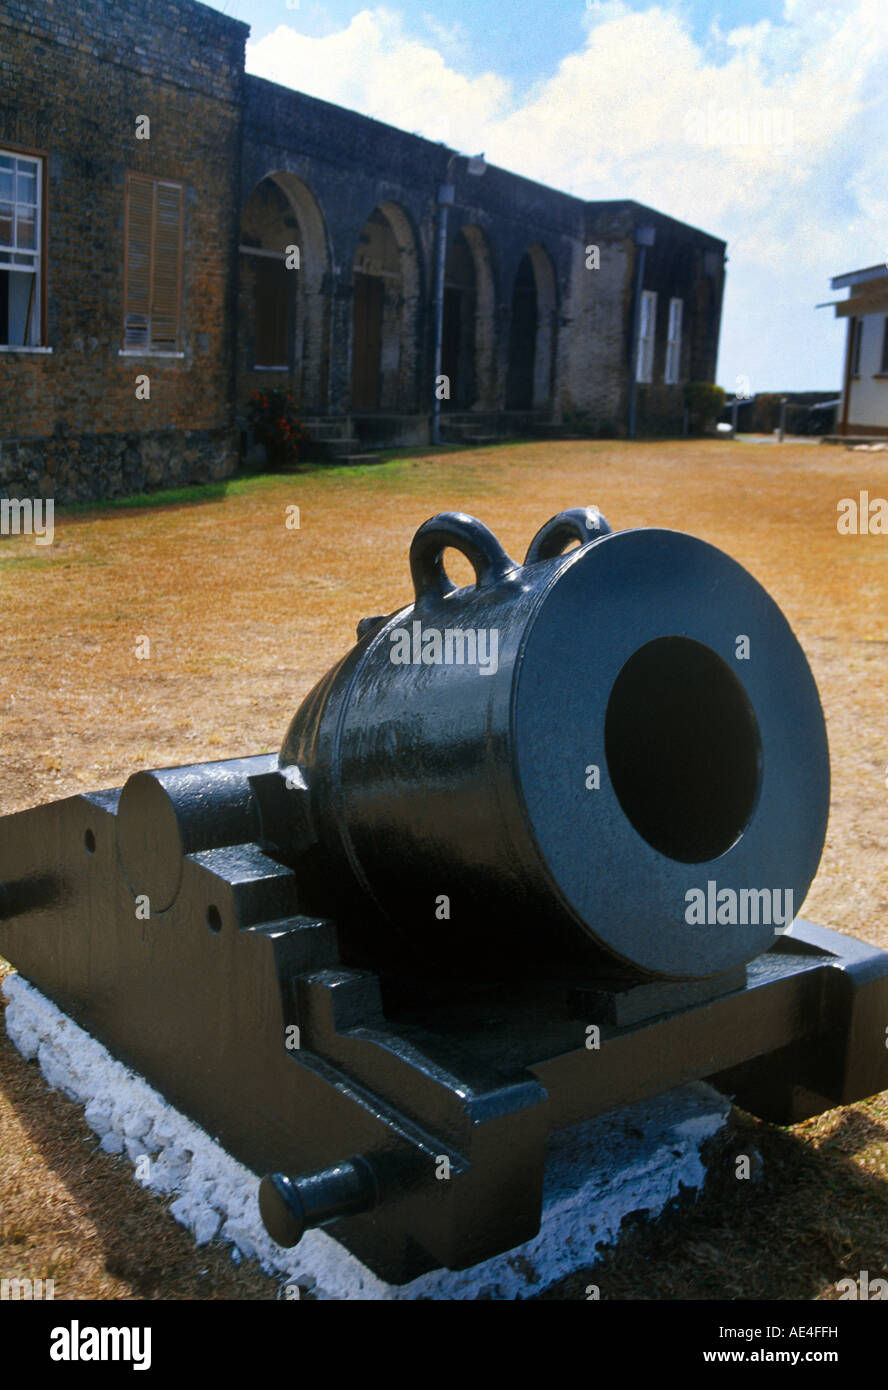 Scarborough Tobago Trinidad Fort King George with Cannon Stock Photo